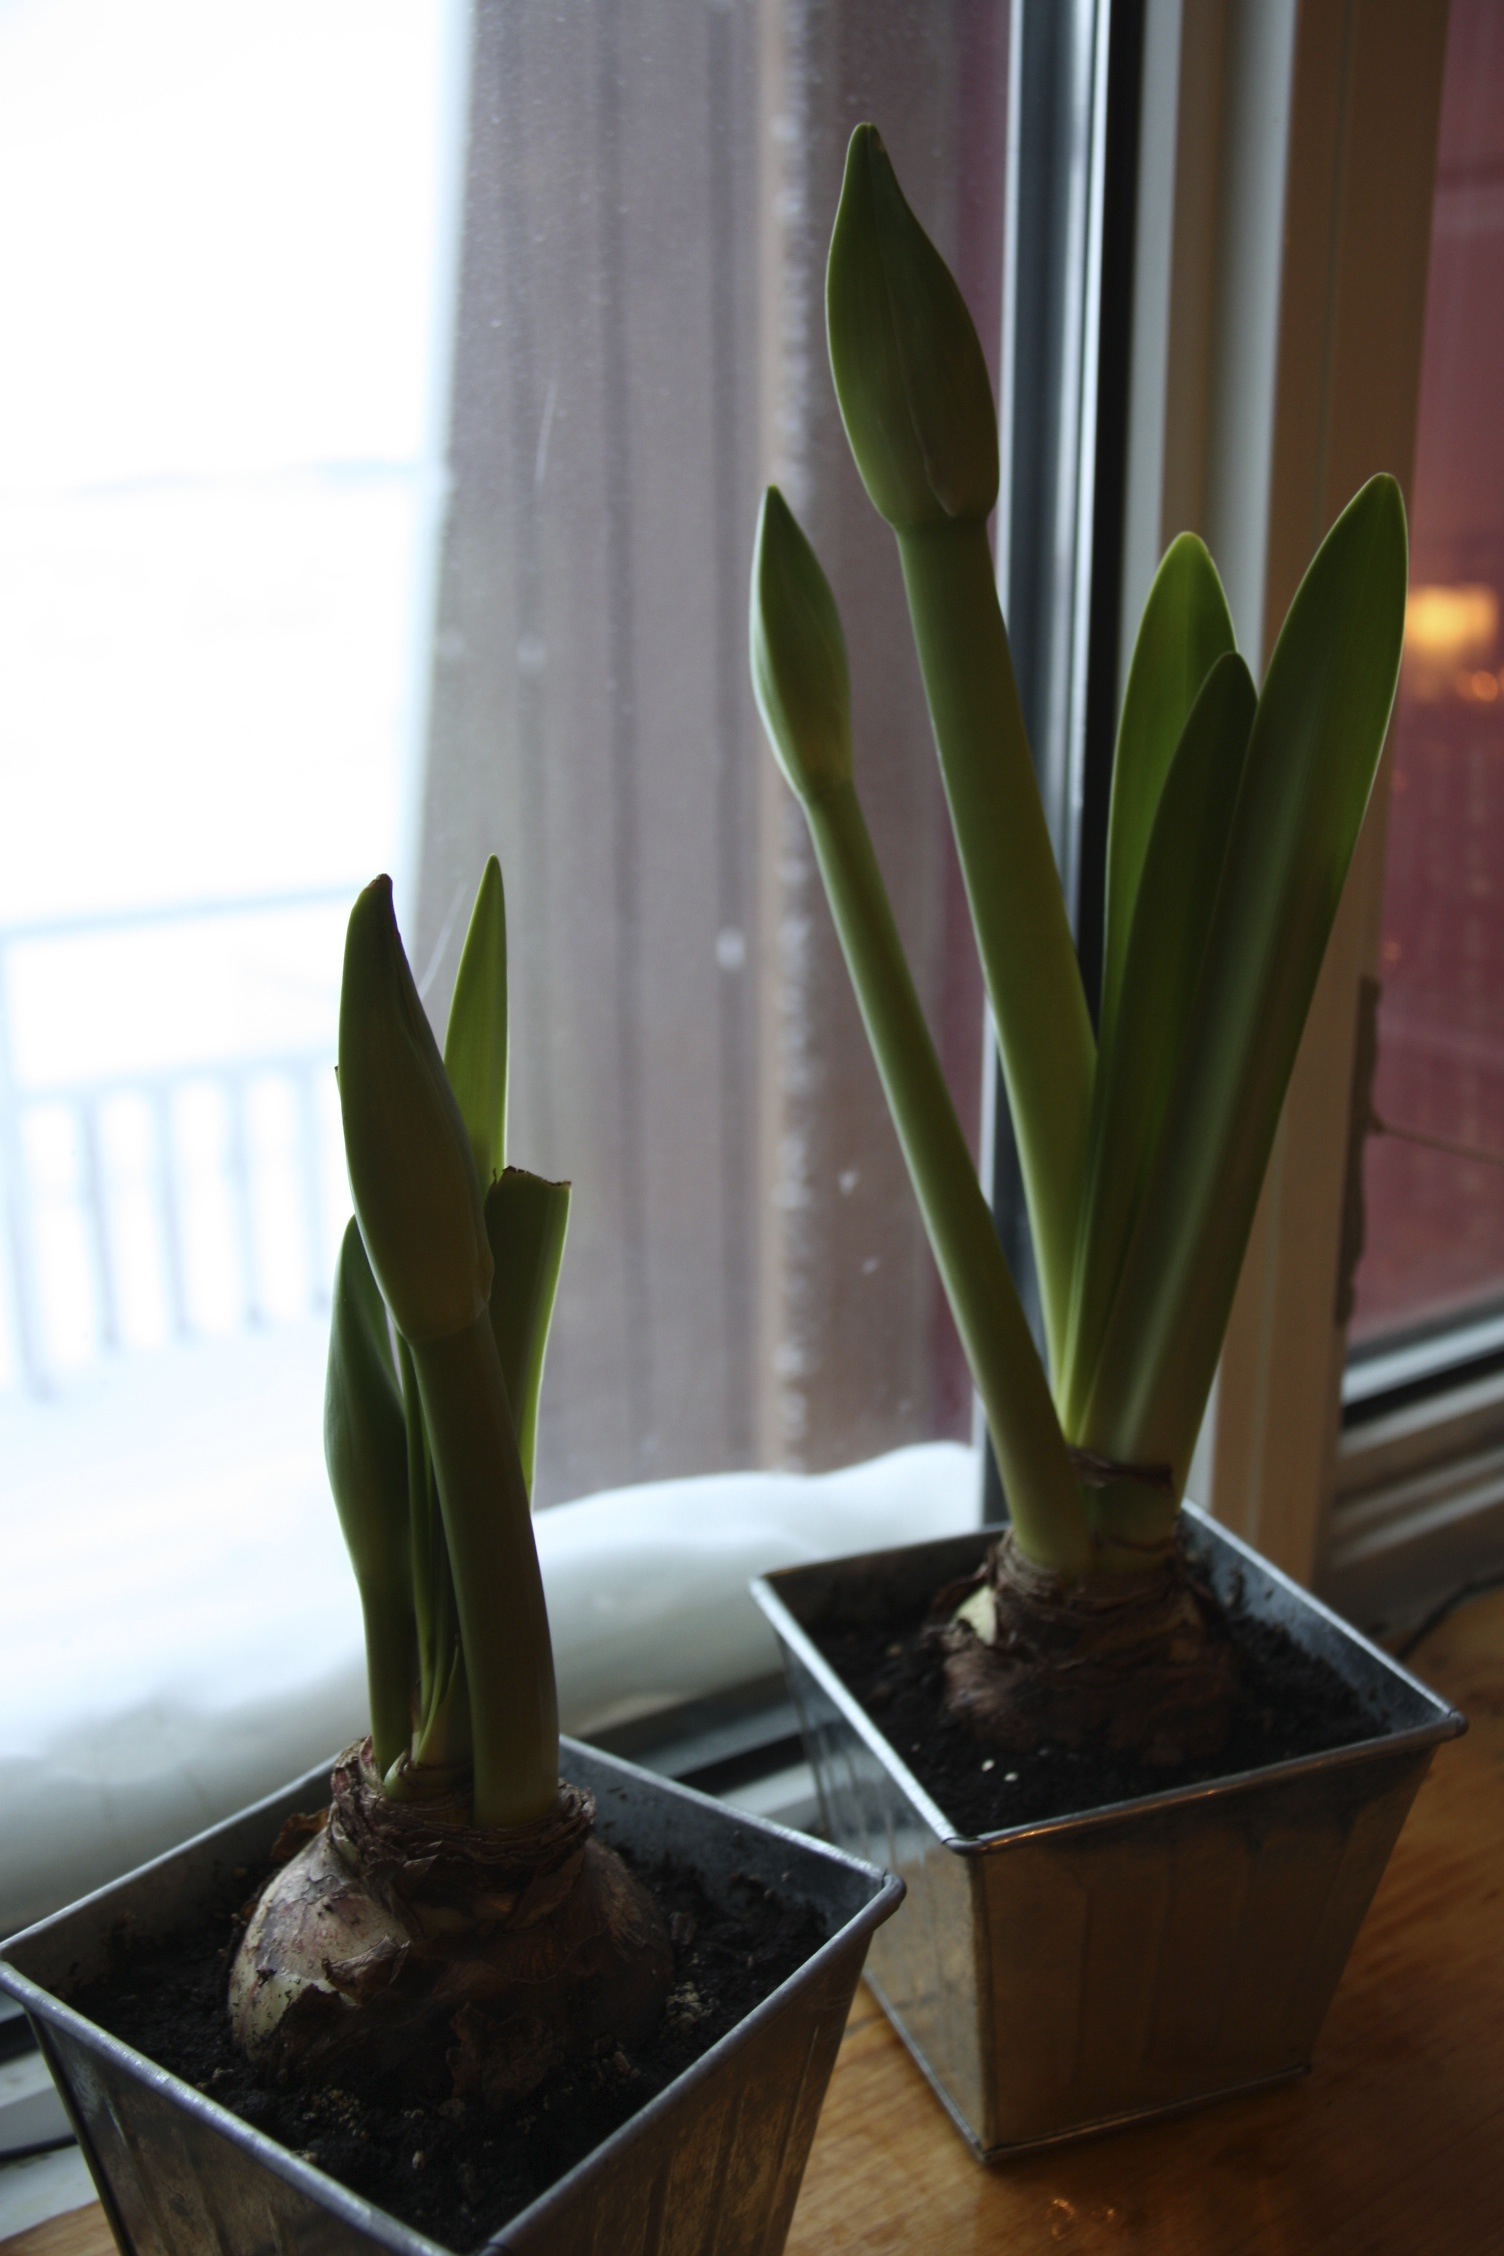 Amaryllis sprouting in front of the snowy bay window.